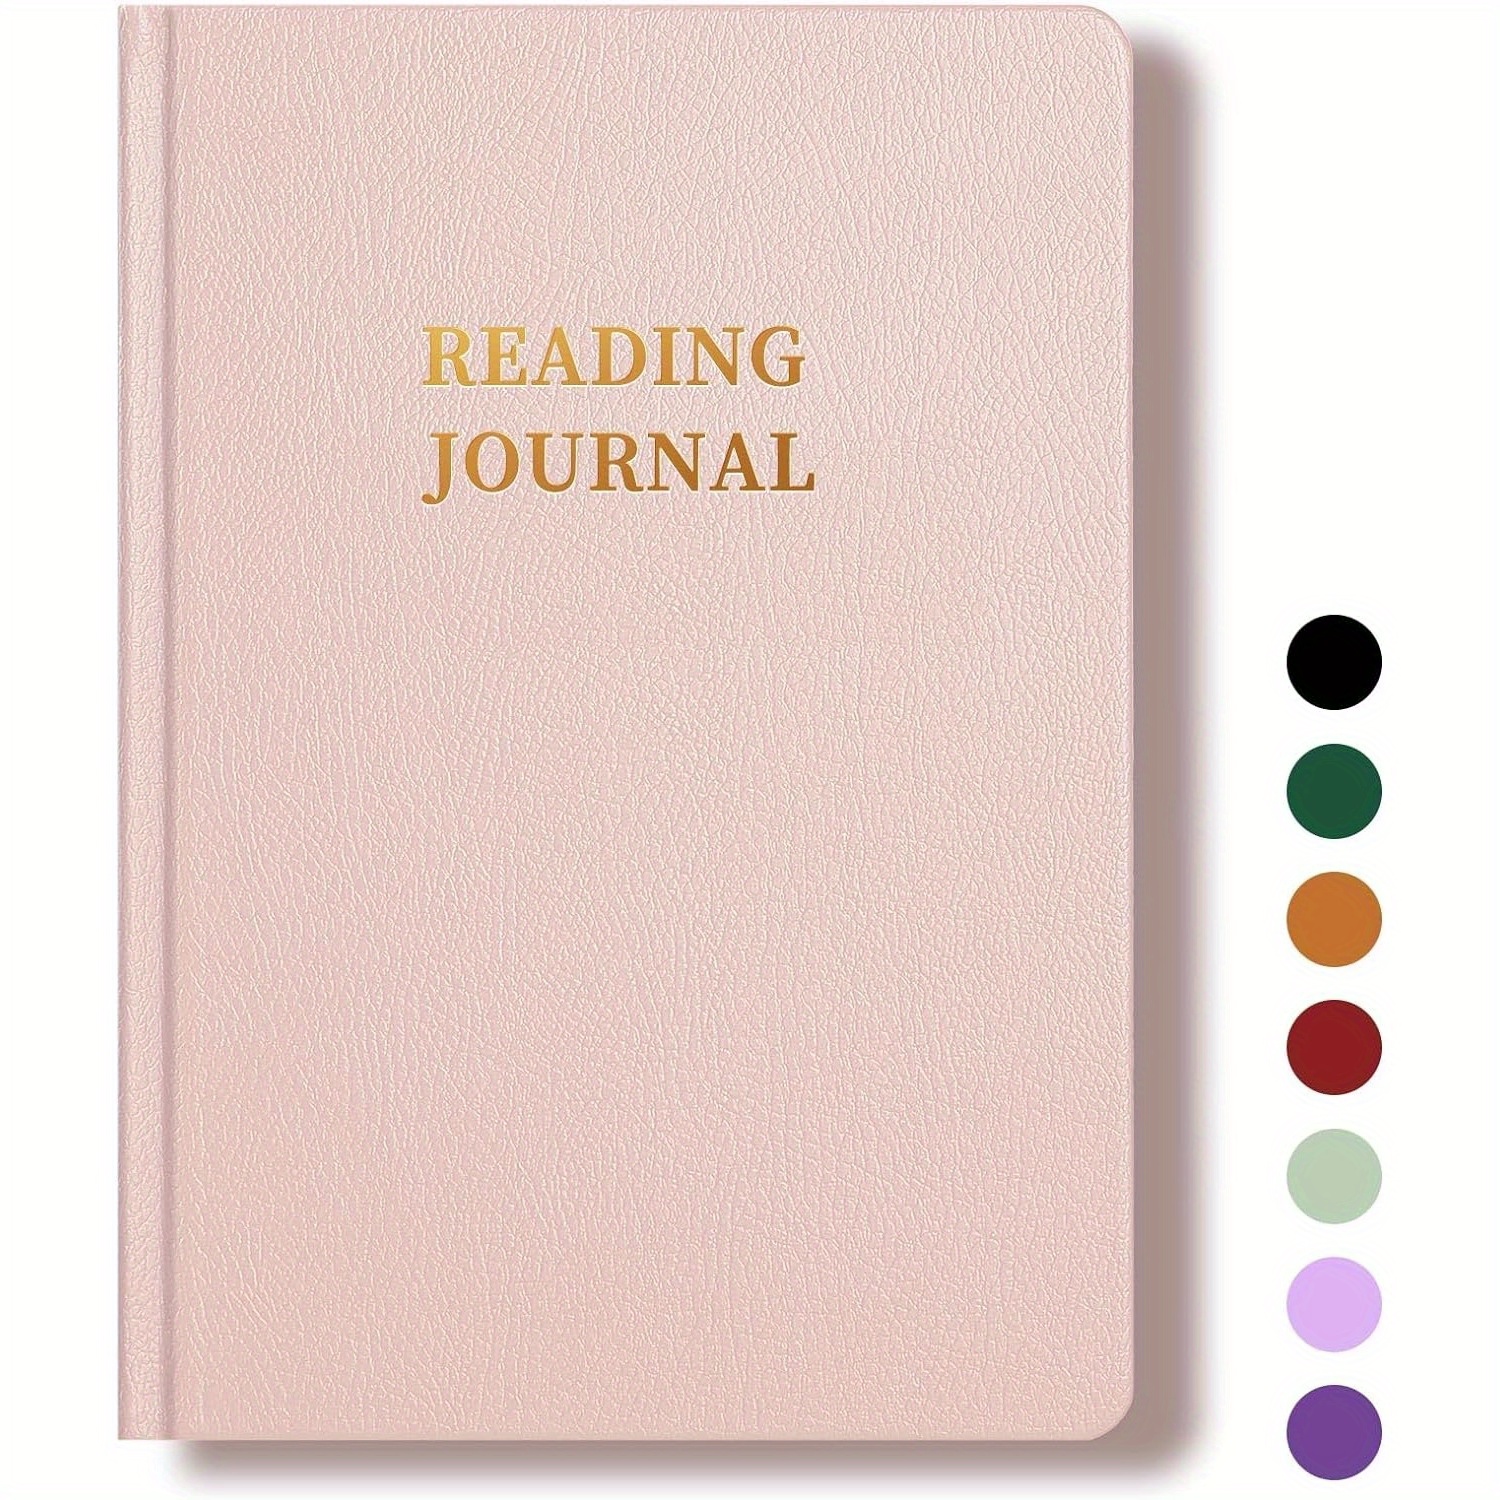 

Reading Journal For Book Lovers - Hardcover Executive Notebook With Dotted Pages, 65 Book Review Sections, Waterproof Leather Cover, Inner Pocket, Thick Non-bleed Paper, Ribbon Bookmark